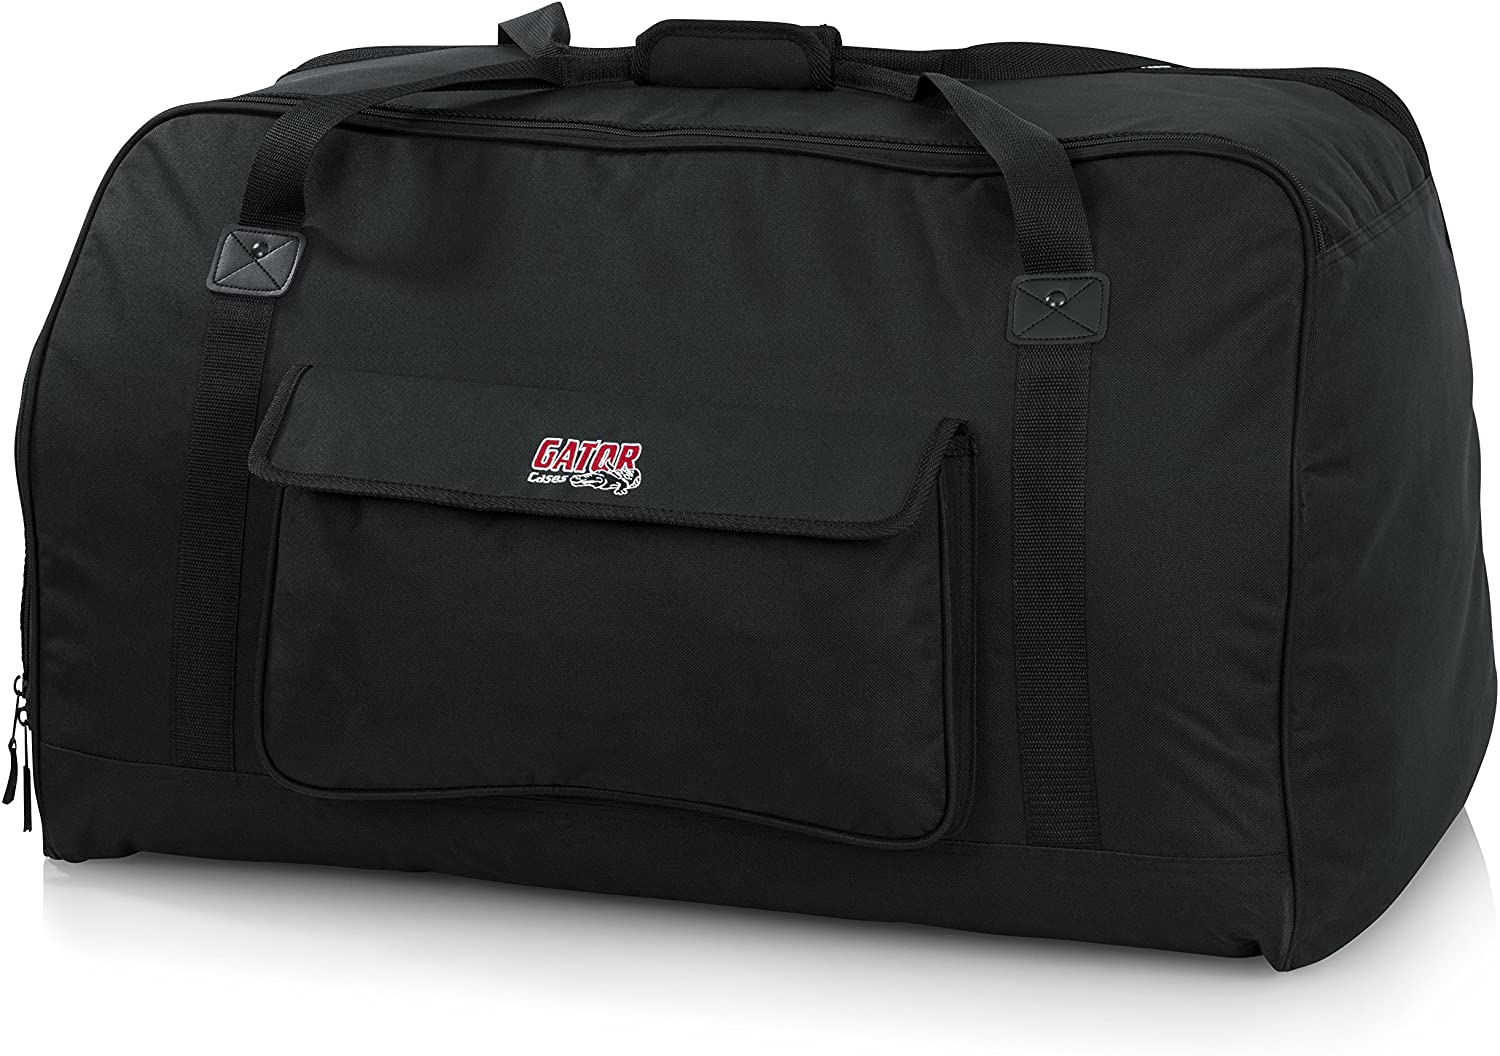 Gator Cases Heavy-Duty Speaker Tote Bag for Compact 15" Speaker Cabinets - Pro-Distributing